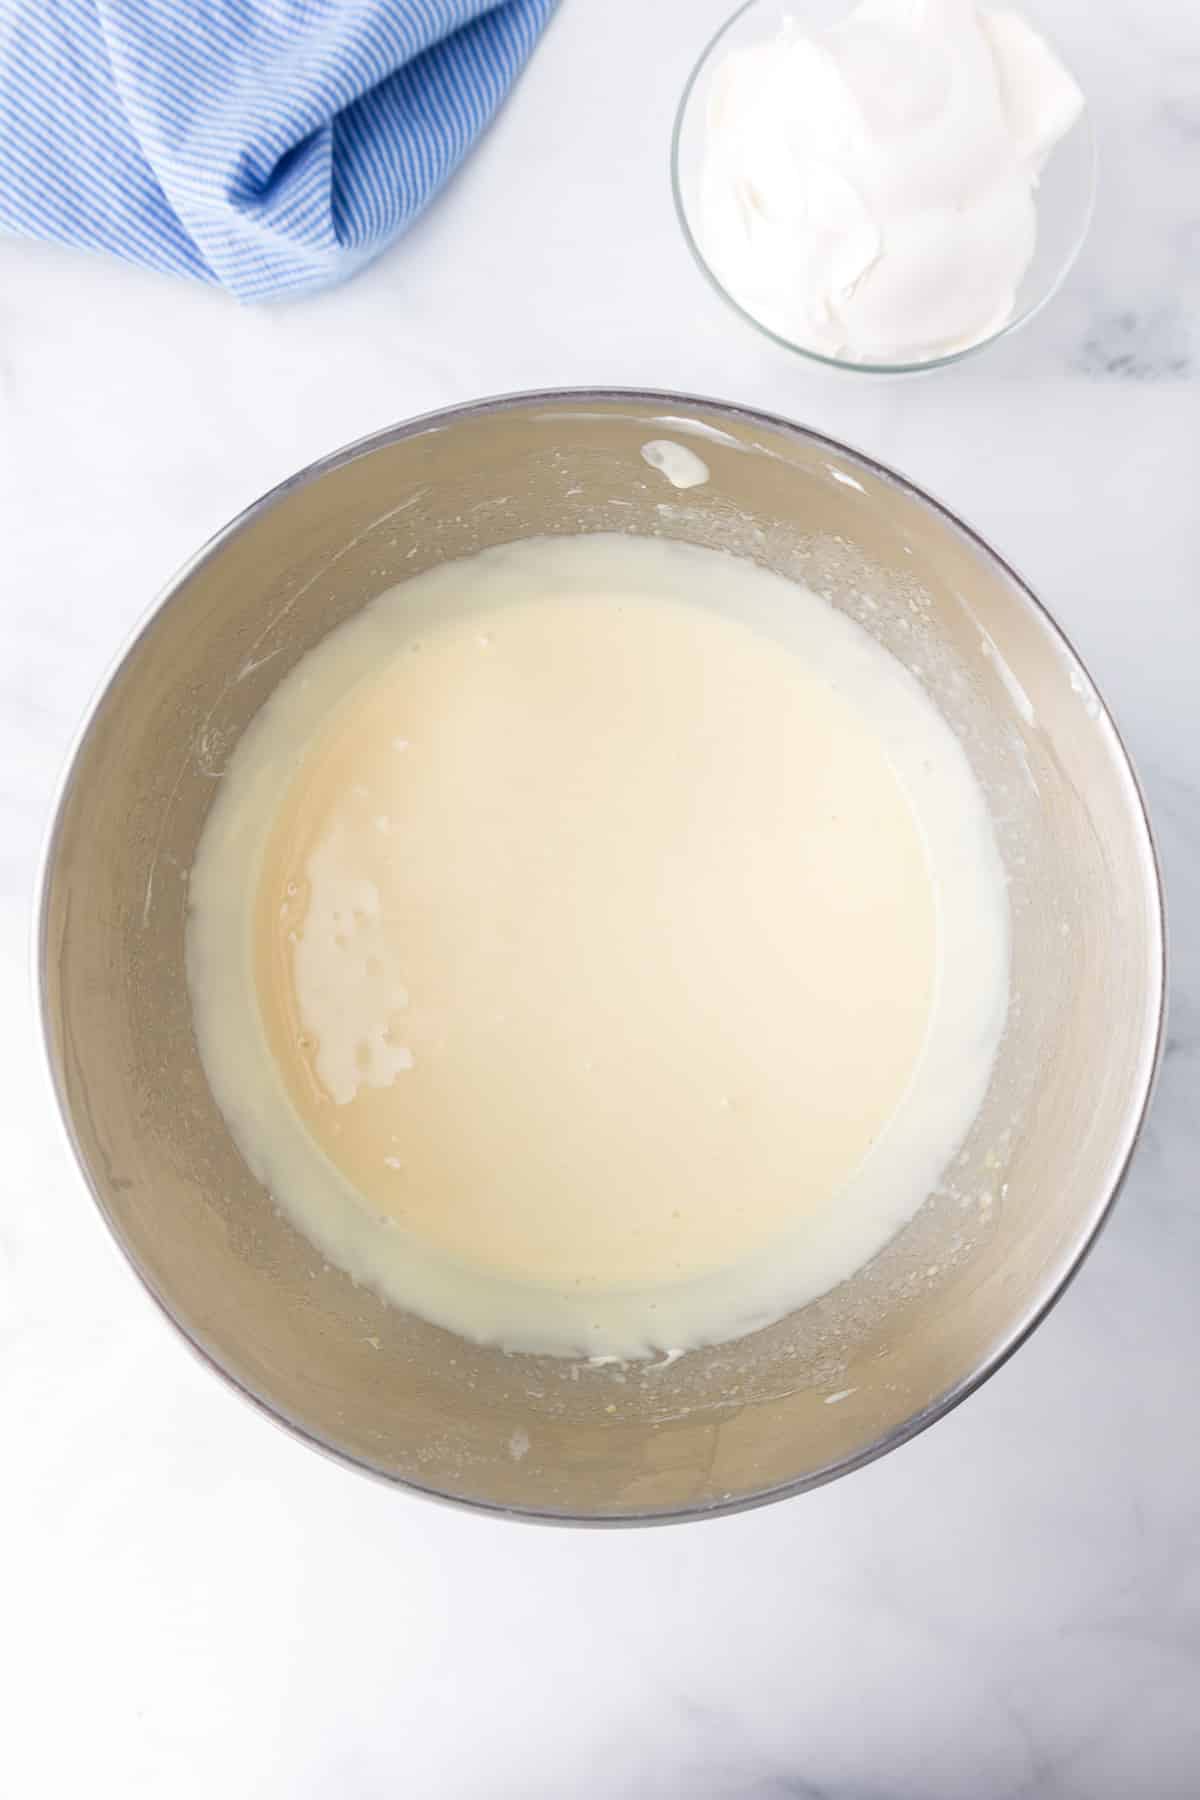 Pudding mixture and milk being blended into the mixing bowl with whipped topping in a bowl on the counter nearby.